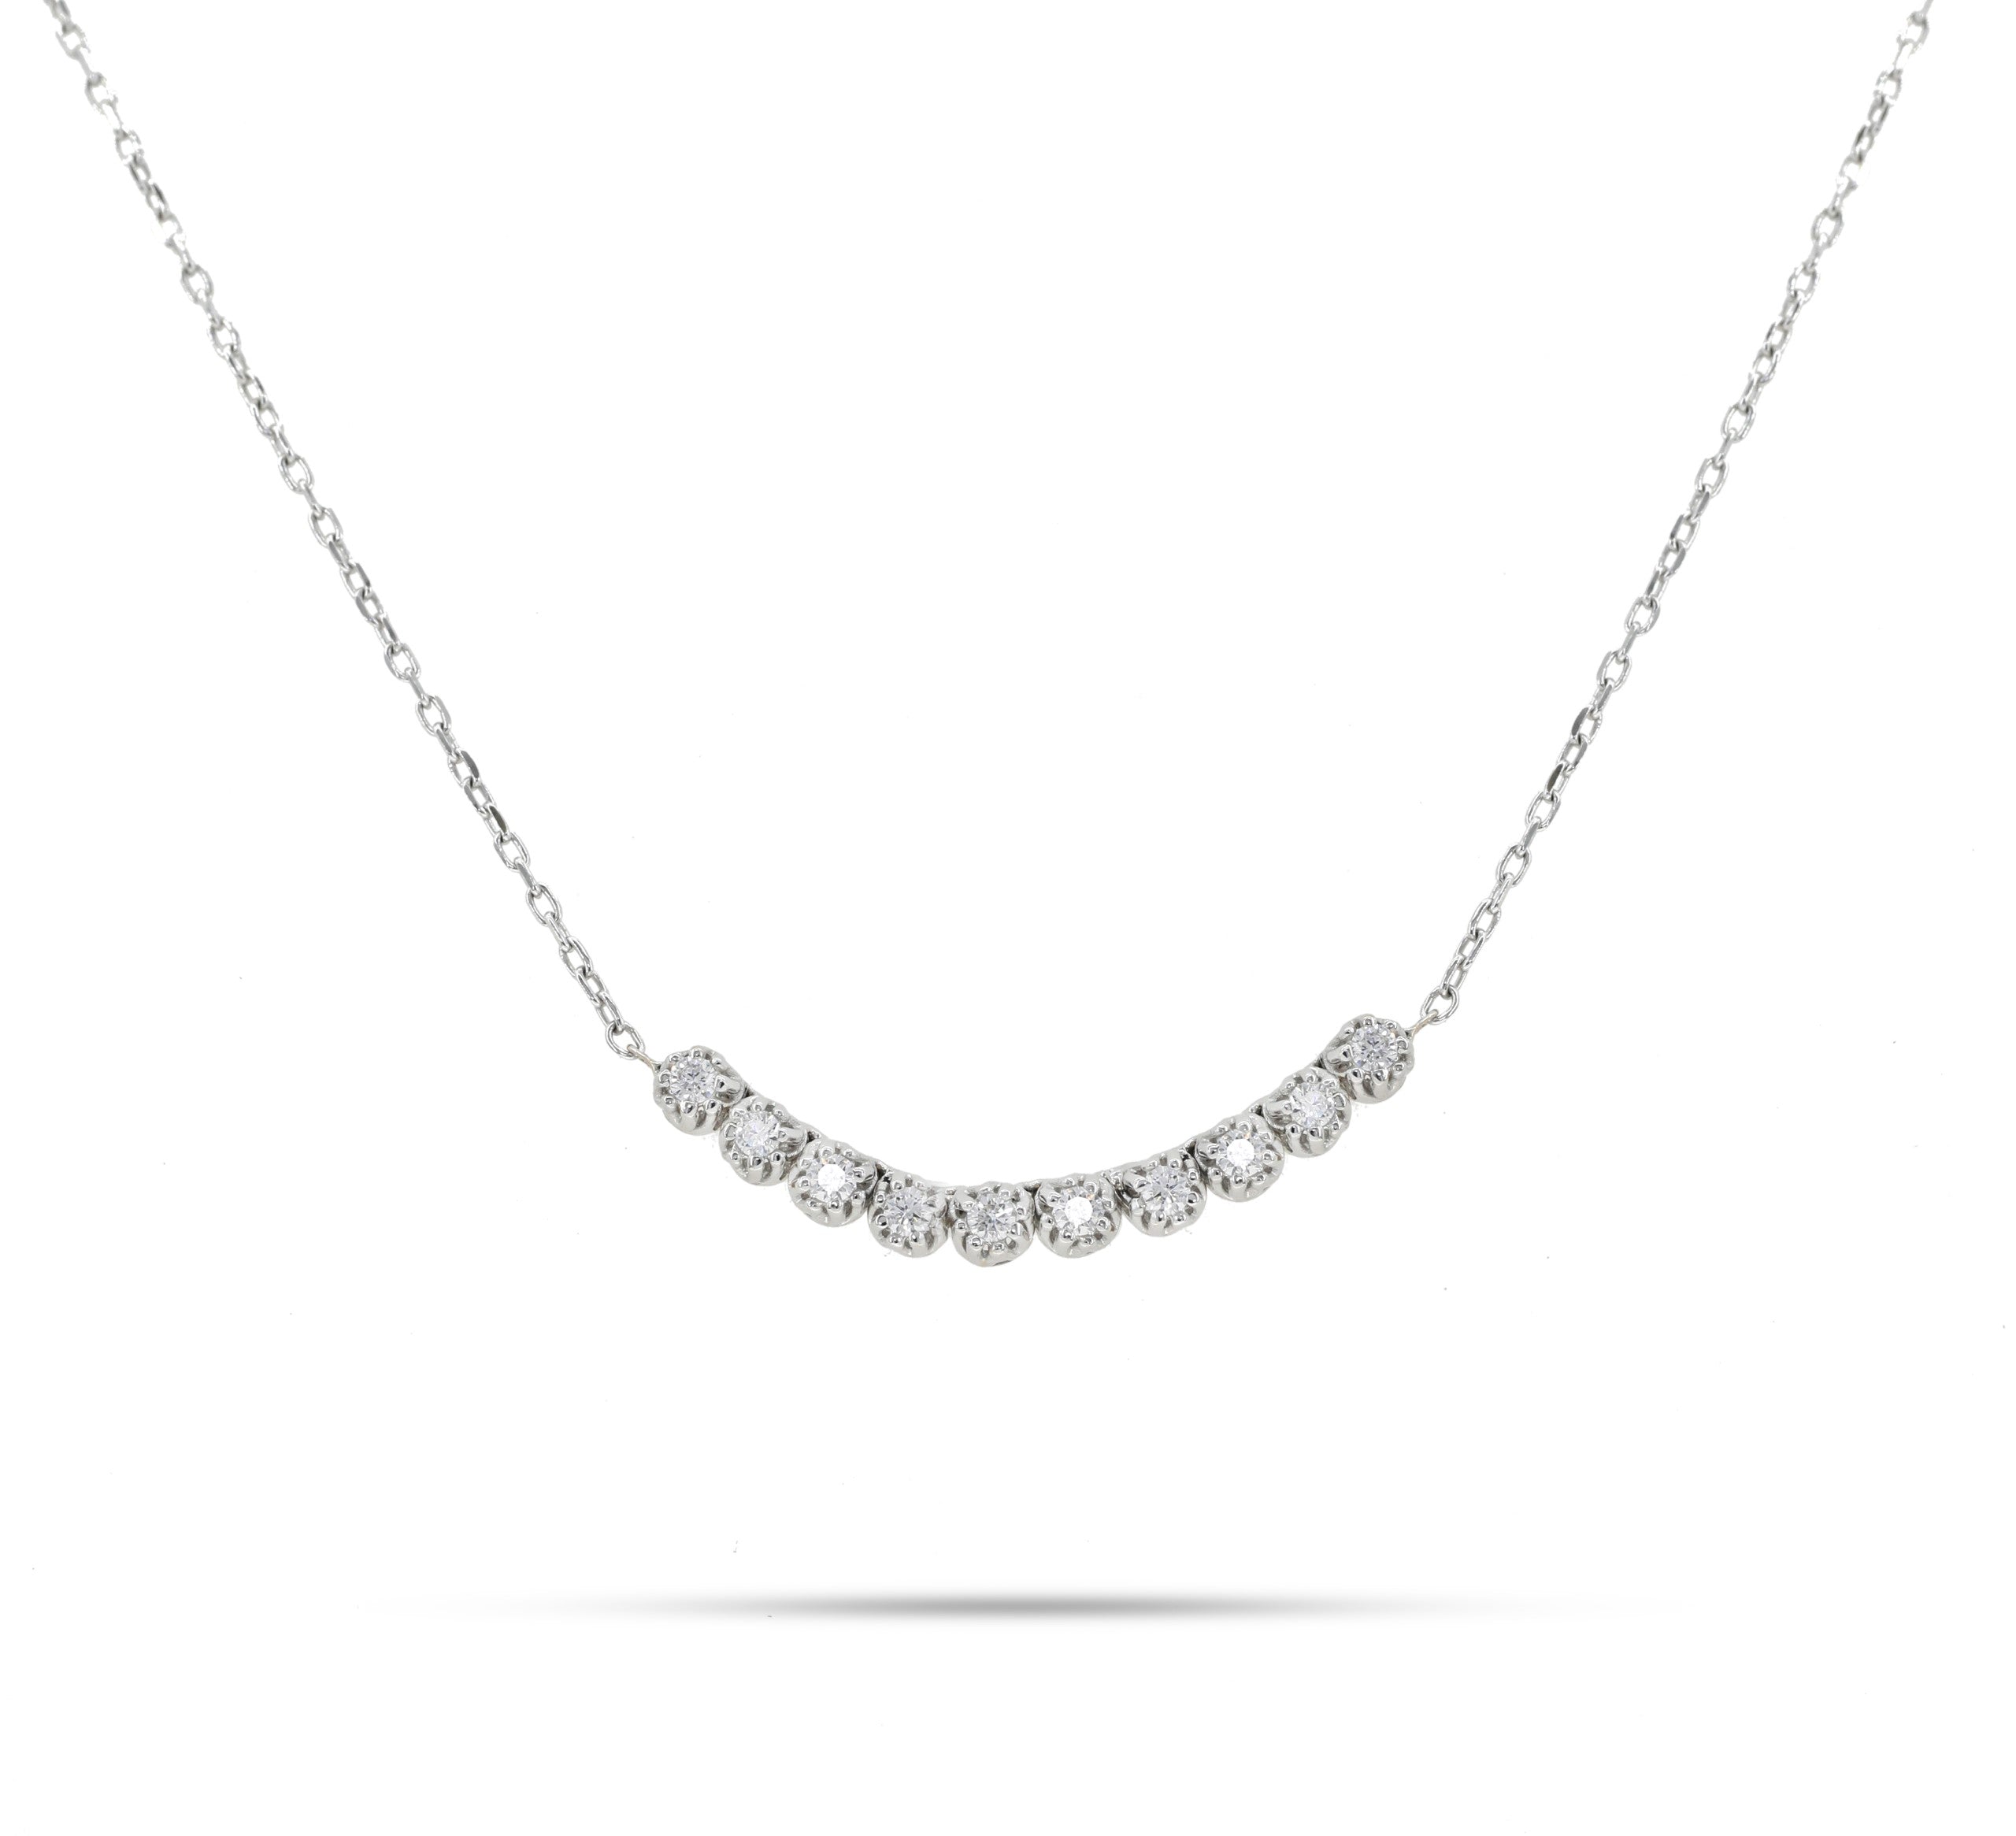 Quarter Tennis Shinny Outstanding Necklace in White 18 K Gold - S-H043NS